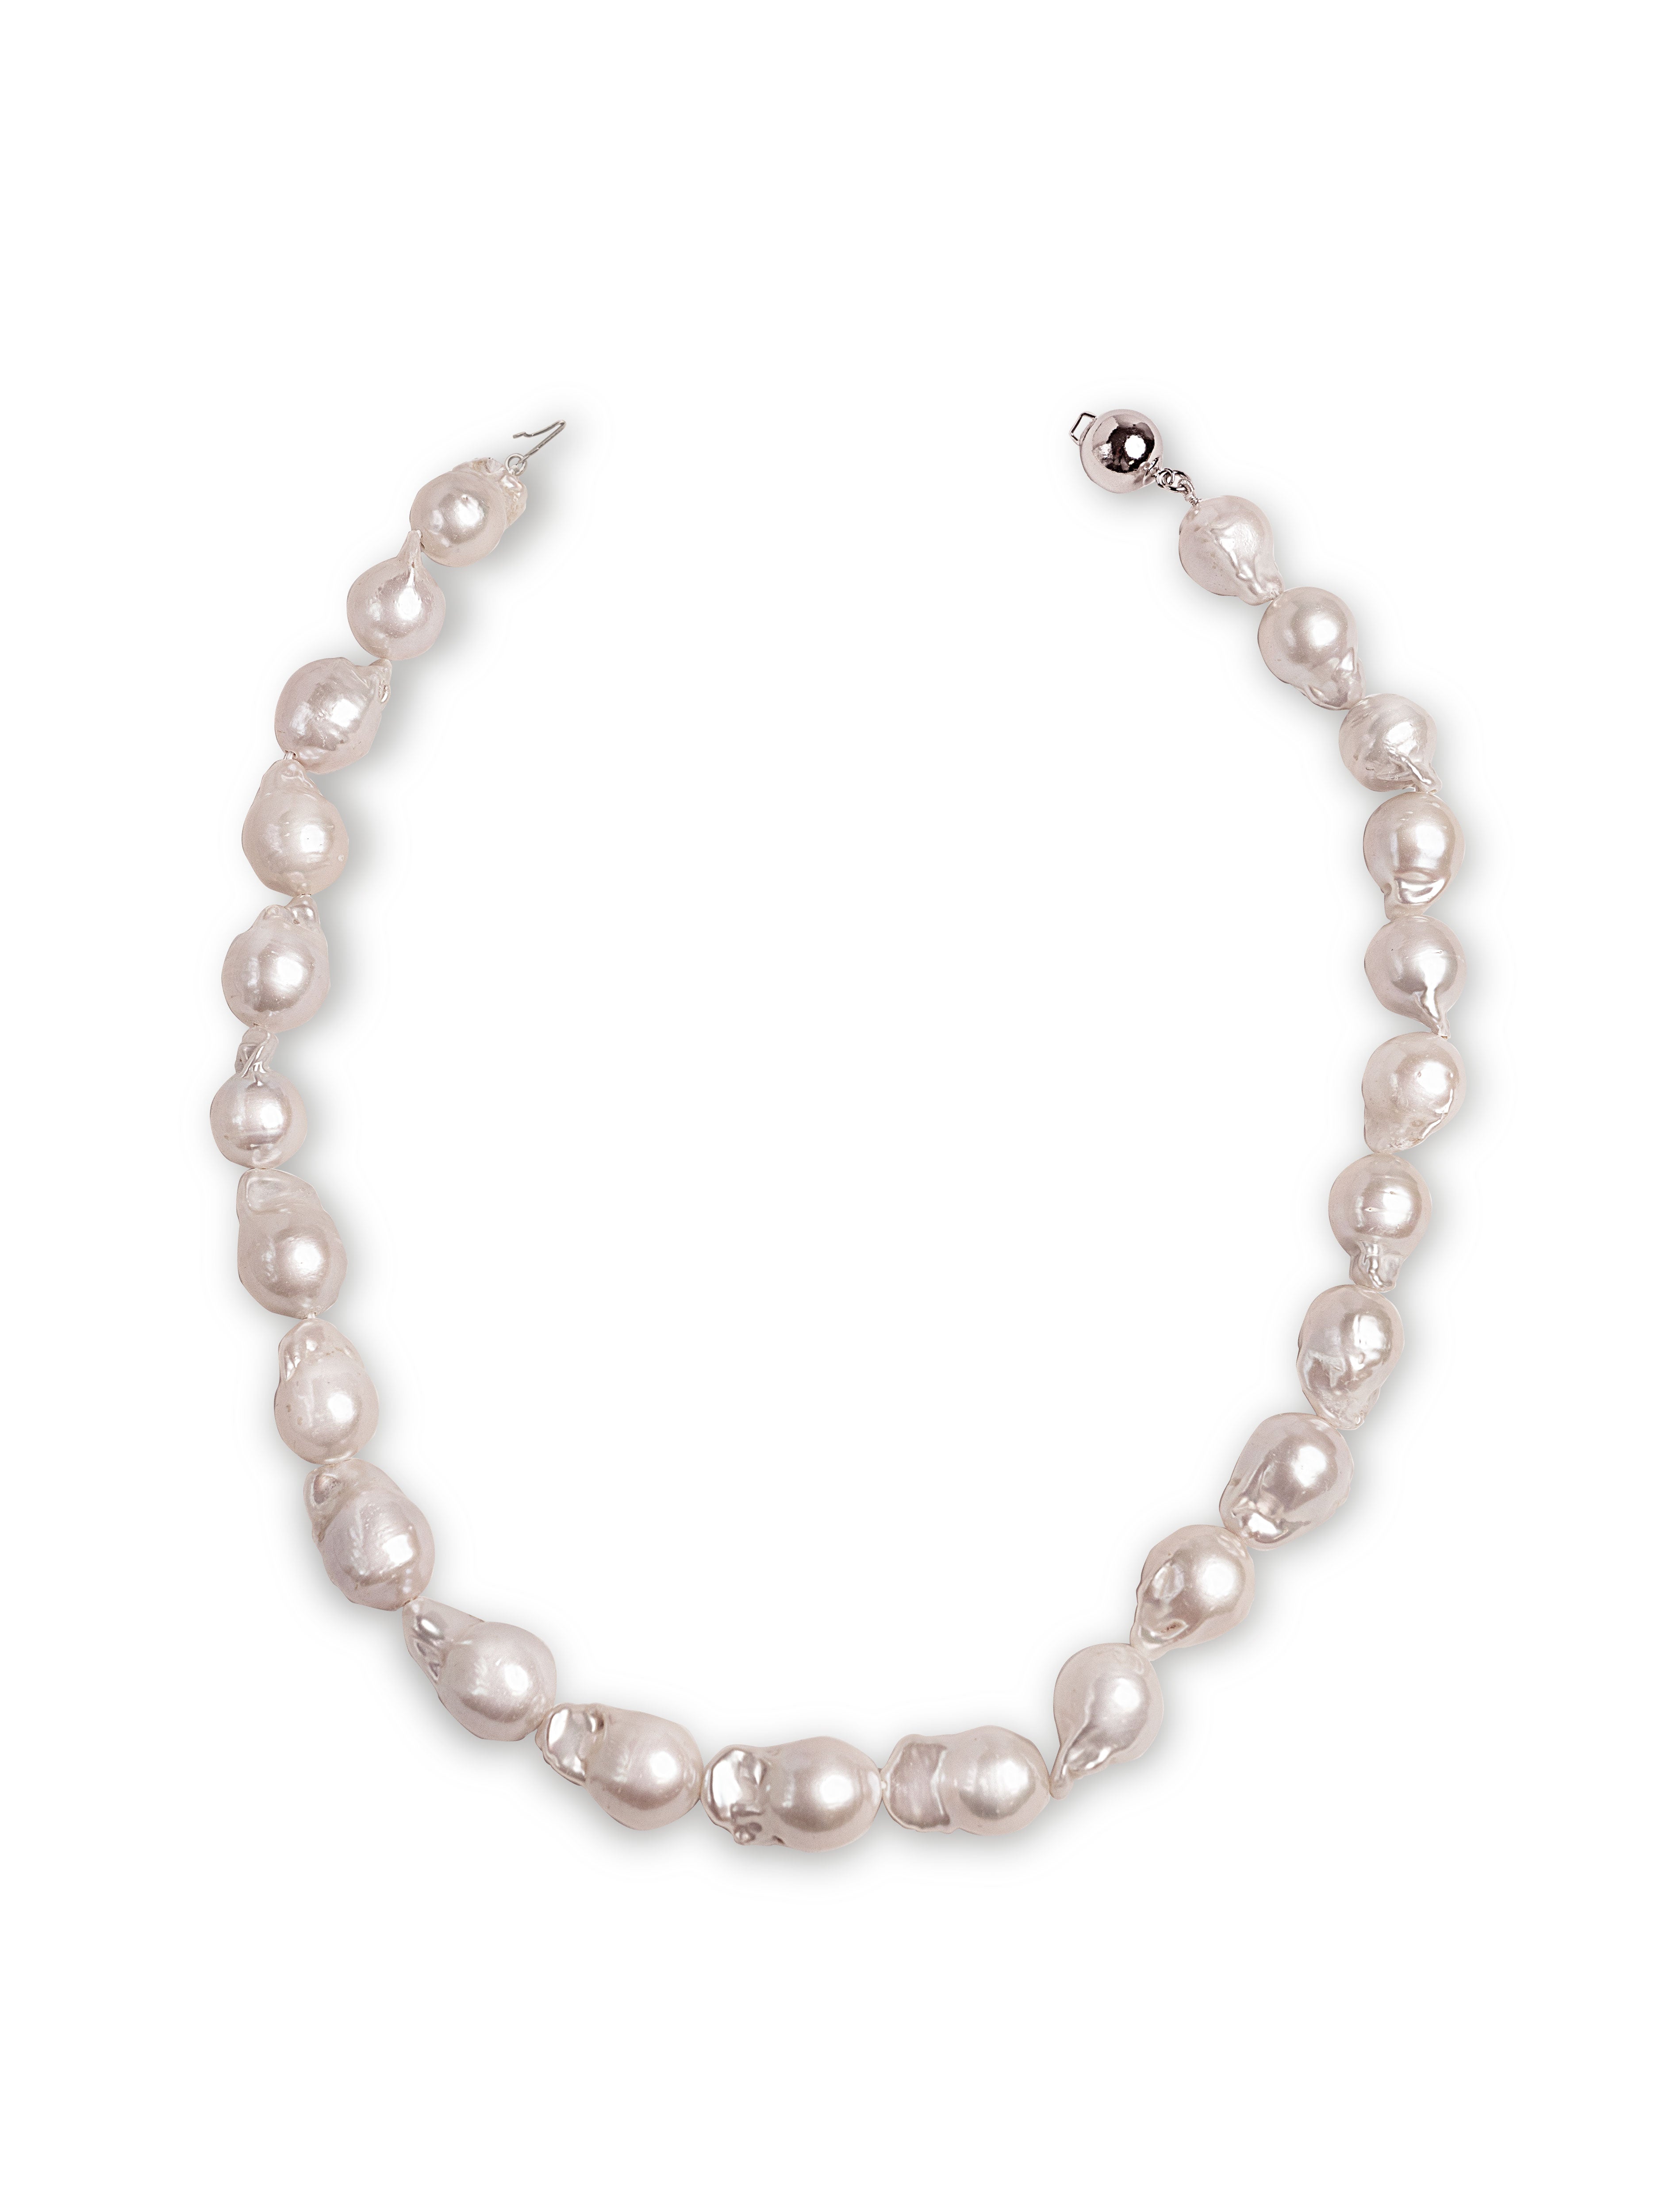 12-13mm Baroque Freshwater Pearl Necklace, 42cm.